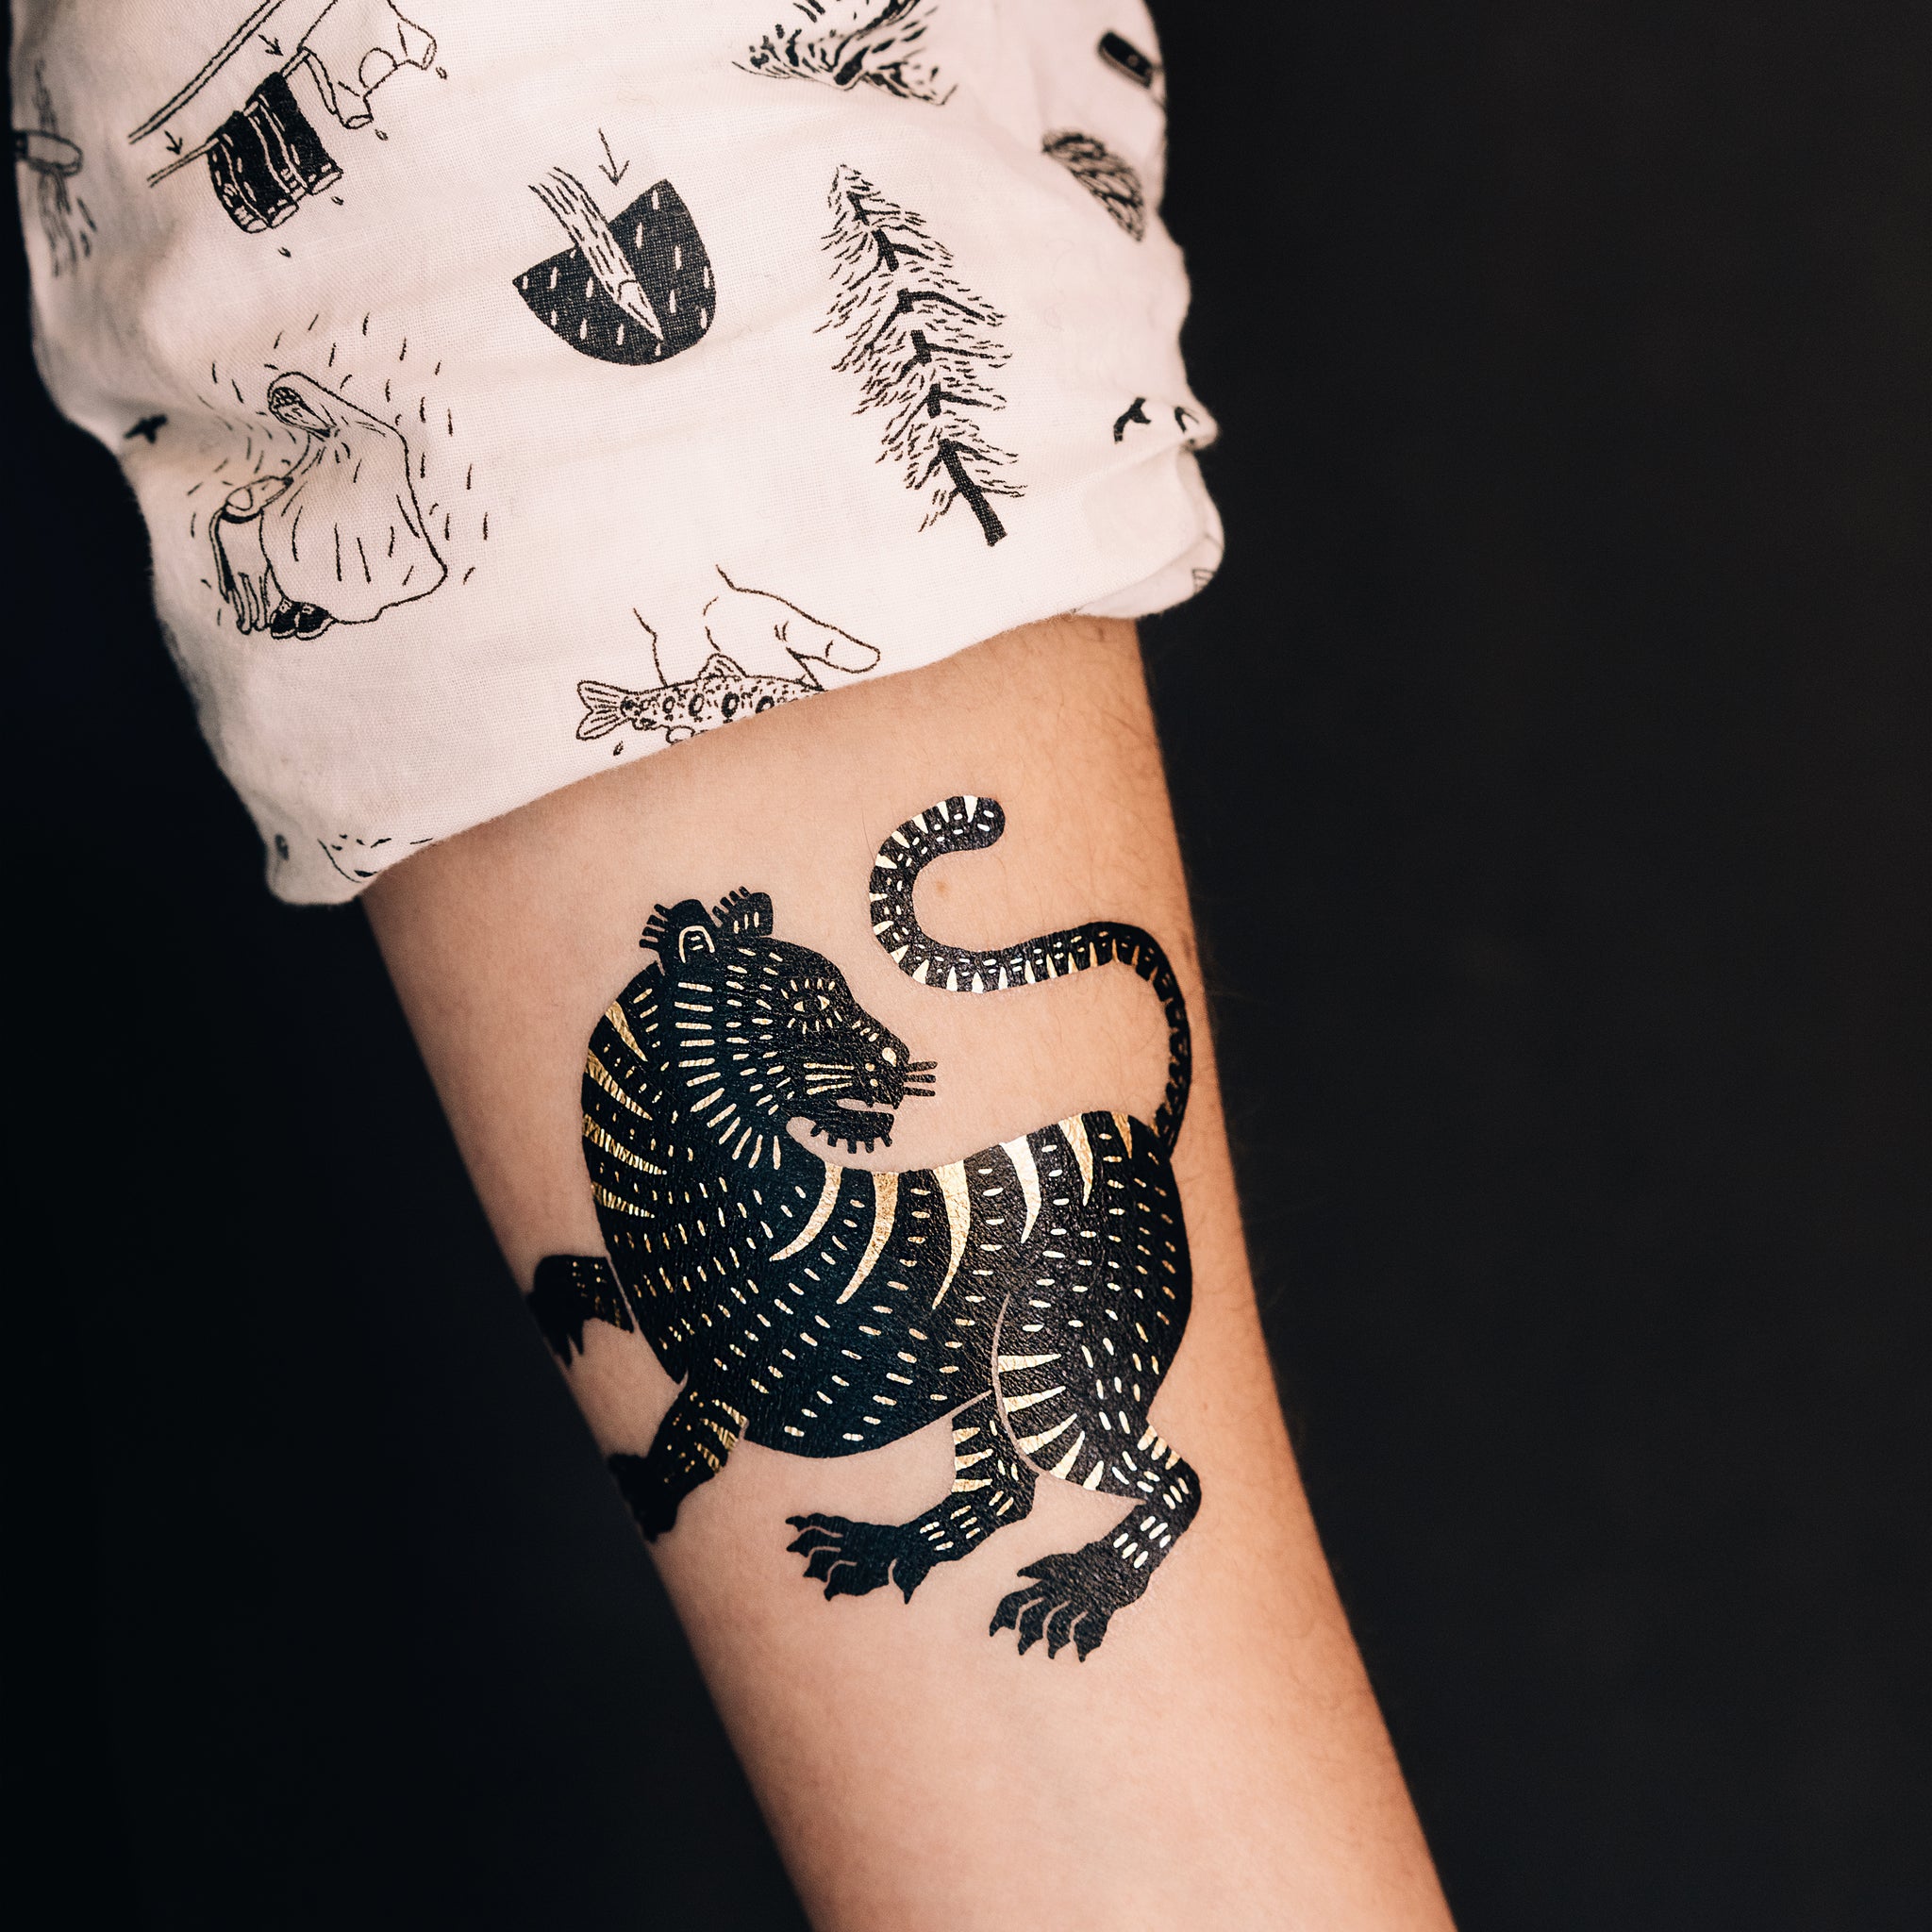 Temporary Tattoo Set By Tatsy, The Simple Set, For Women and Men, Original,  Unique Design, cover Up, Modern, Hipster, Minimalist